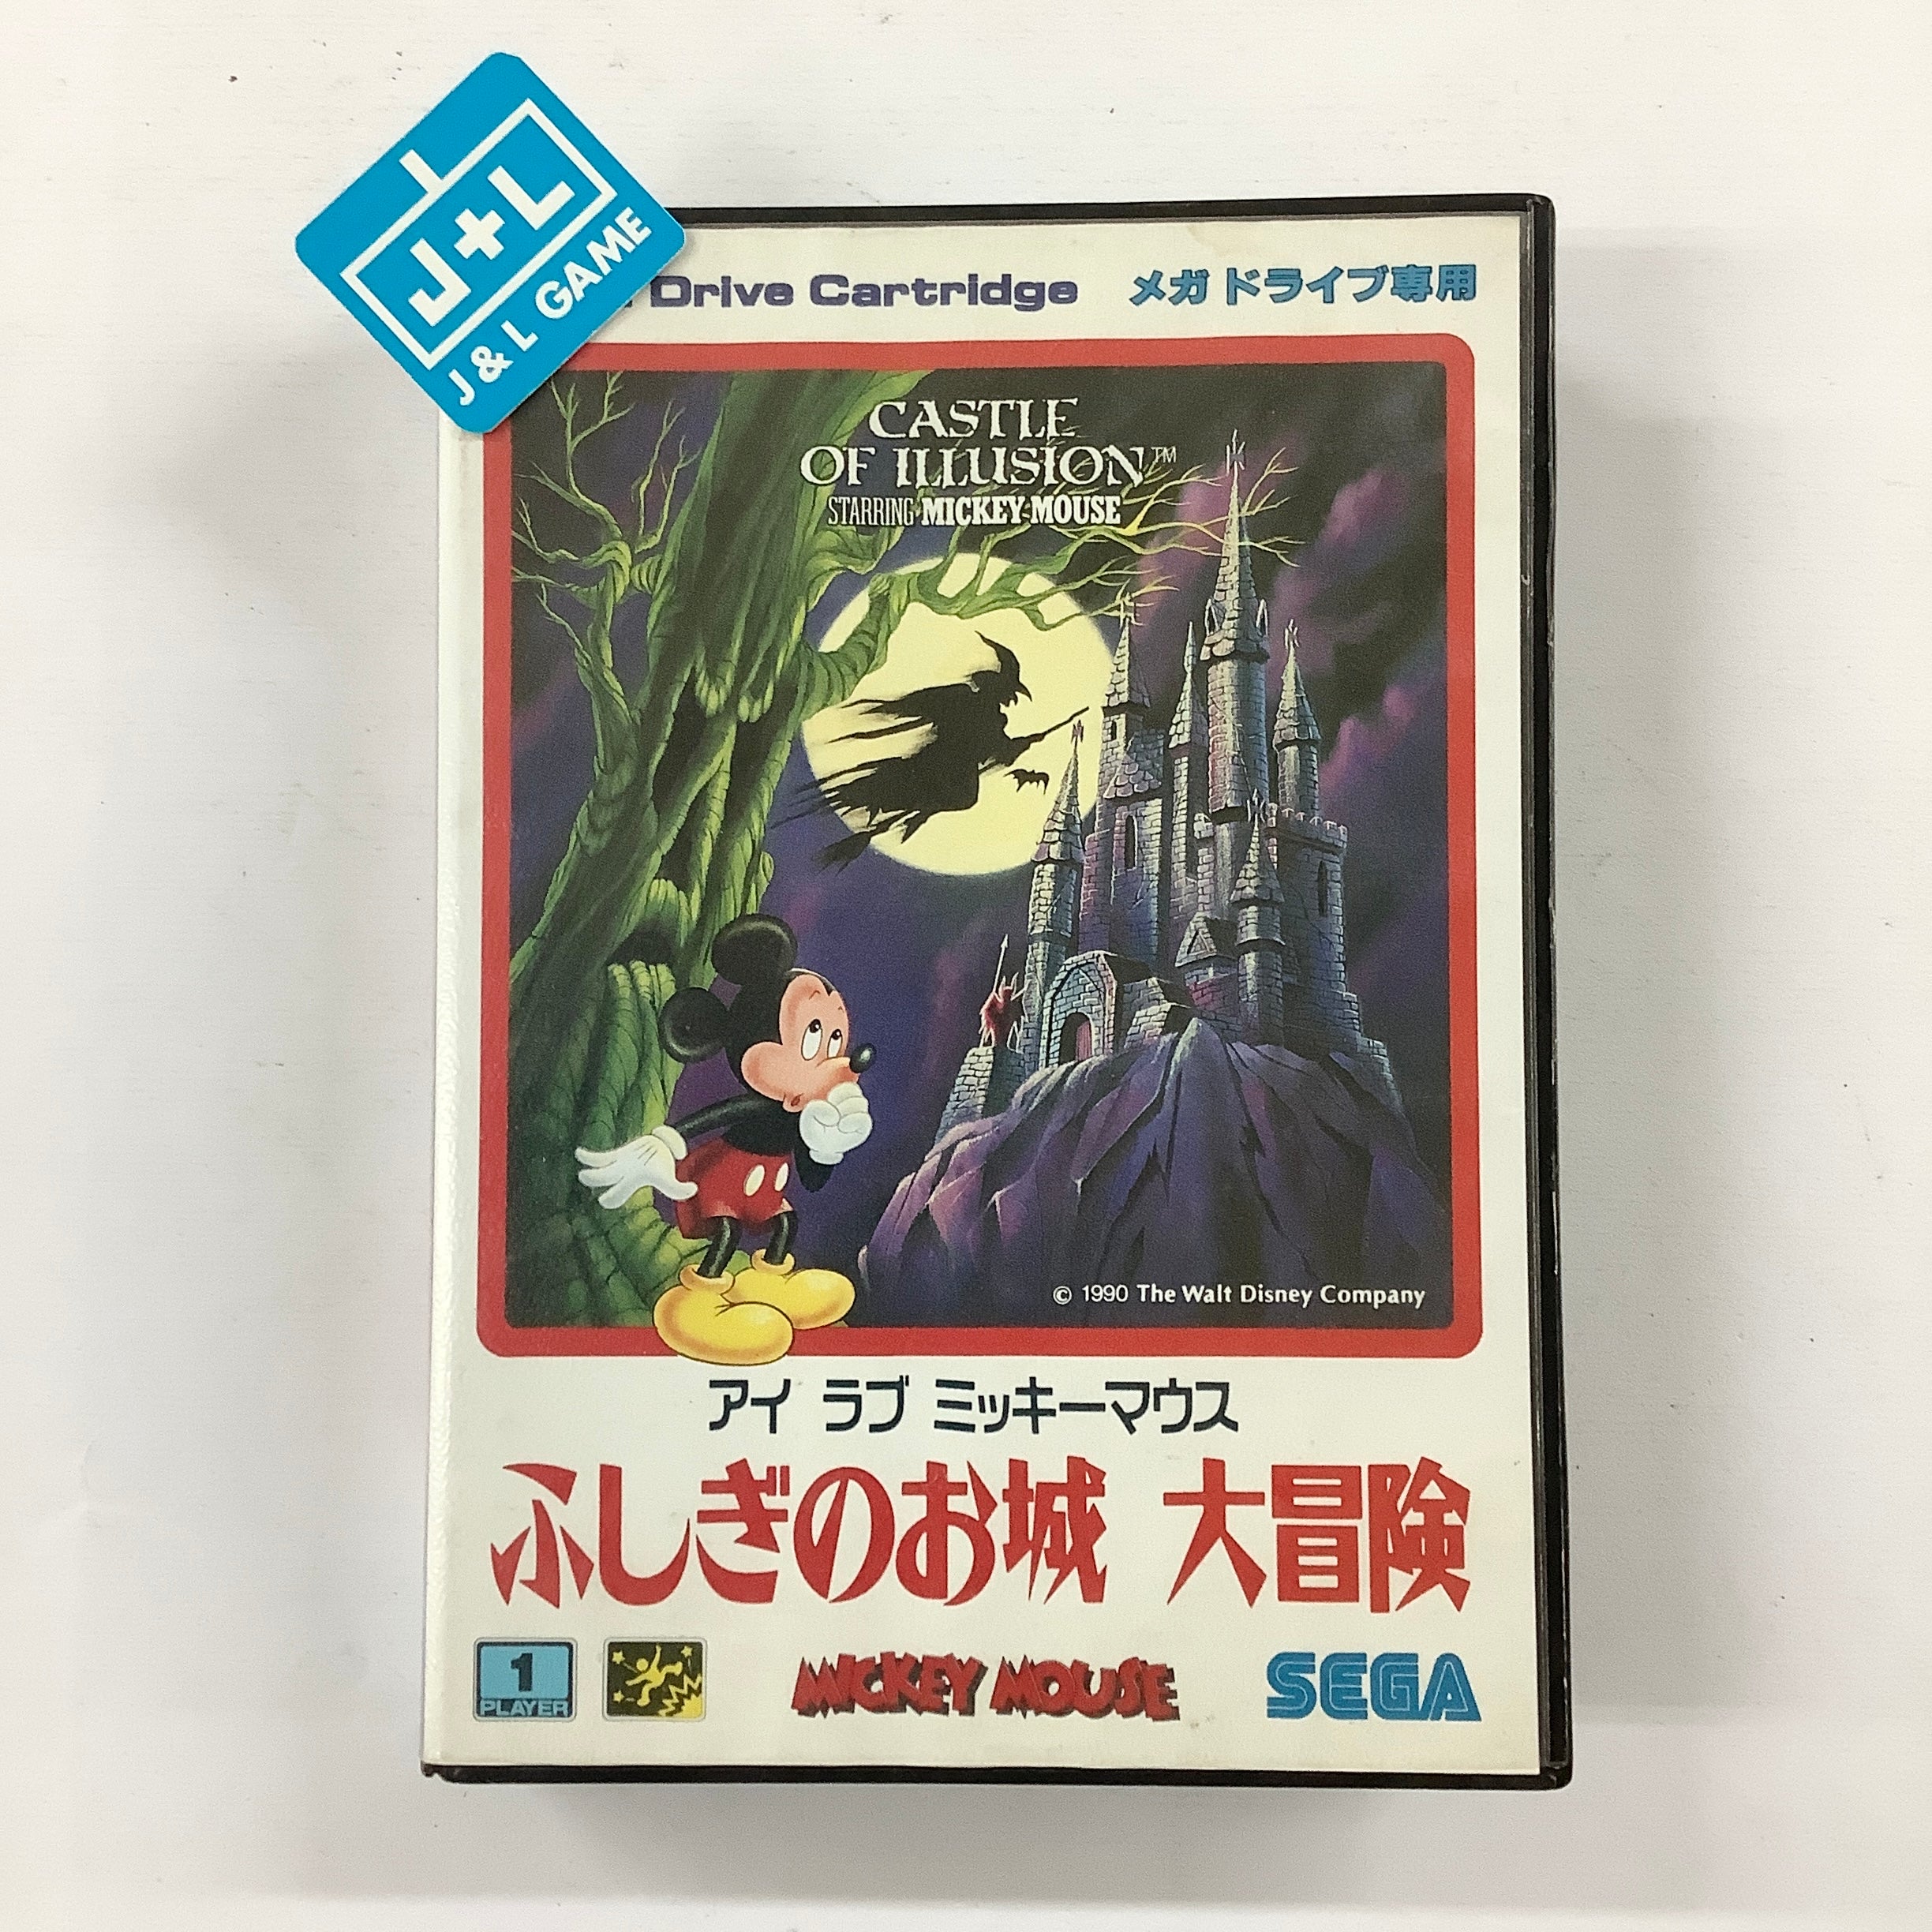 Castle of Illusion Starring Mickey Mouse - (SG) SEGA Mega Drive [Pre-Owned]  (Japanese Import)